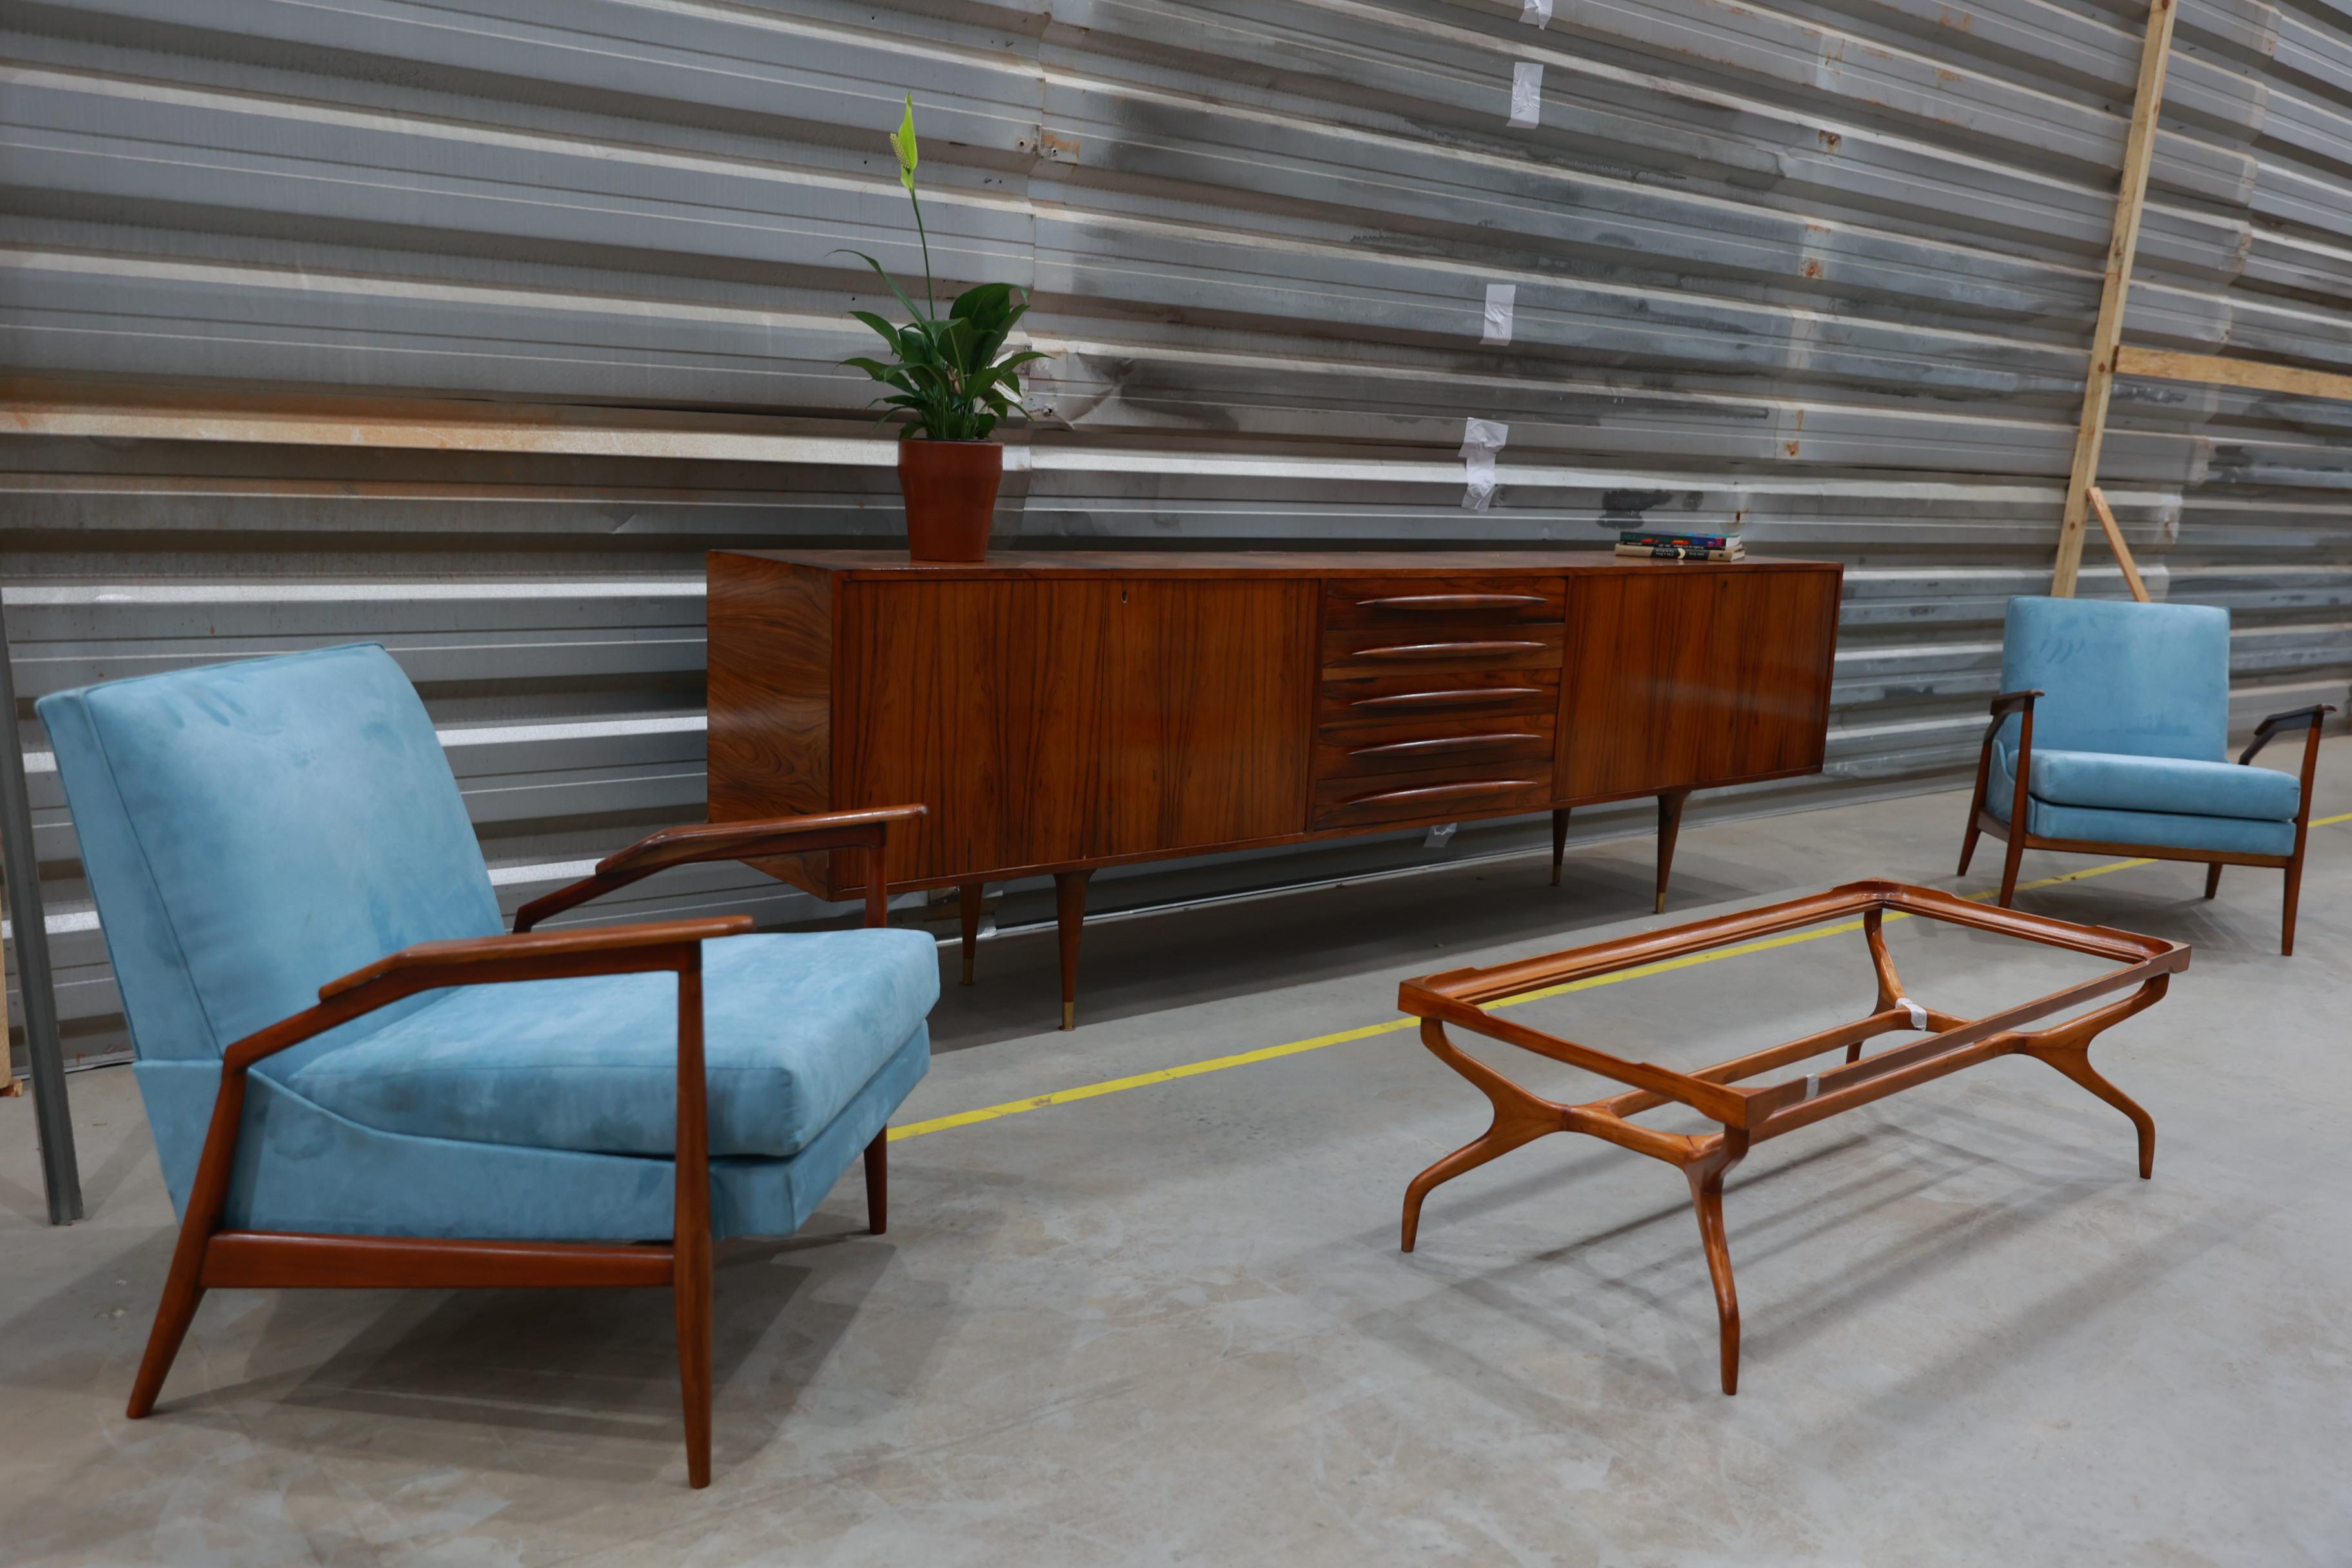 Available today, this Brazilian Modern Credenza in Hardwood by Giuseppe Scapinelli, 1950��’s is nothing less than spectacular!

This credenza was designed by Giuseppe Scapinelli in the 1950s. It is made with Brazilian rosewood (also known as